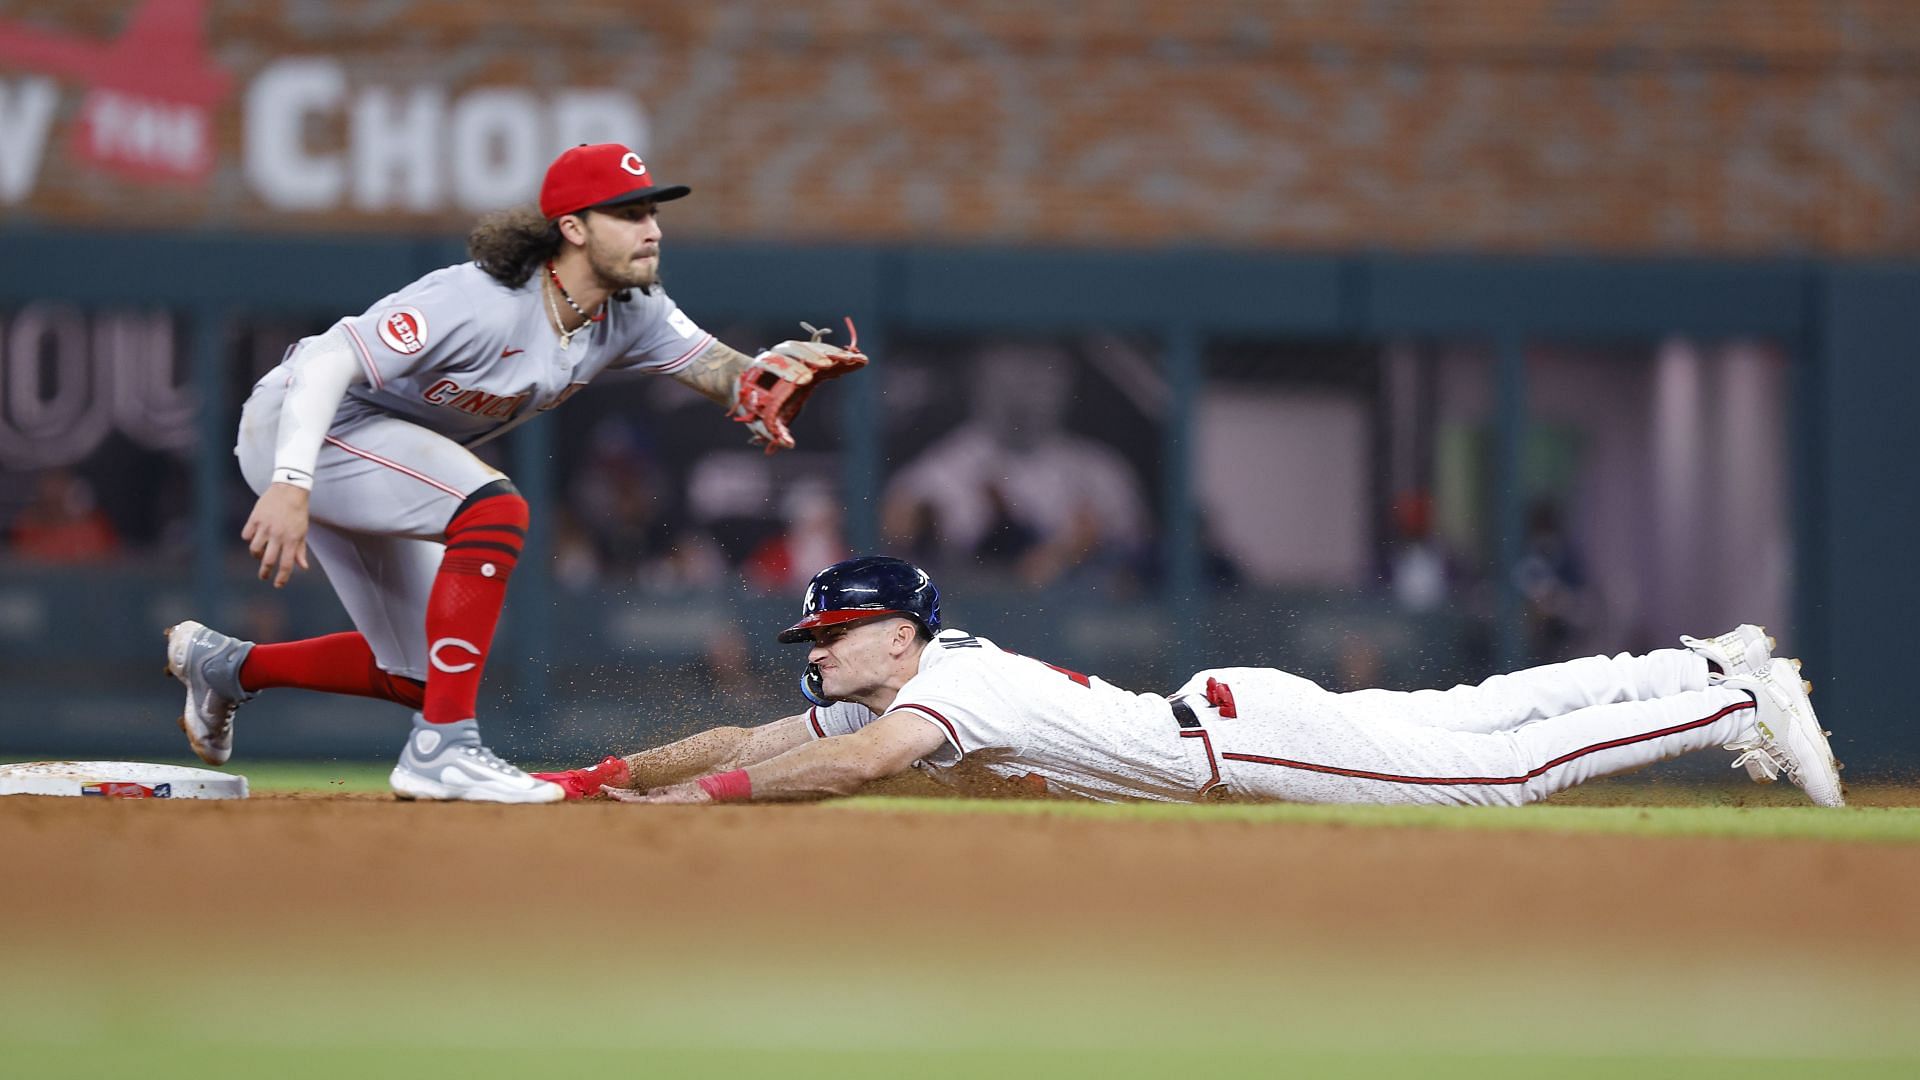 Sam Hilliard of the Atlanta Braves slides in to steal second under Jonathan India of the Cincinnati Reds.